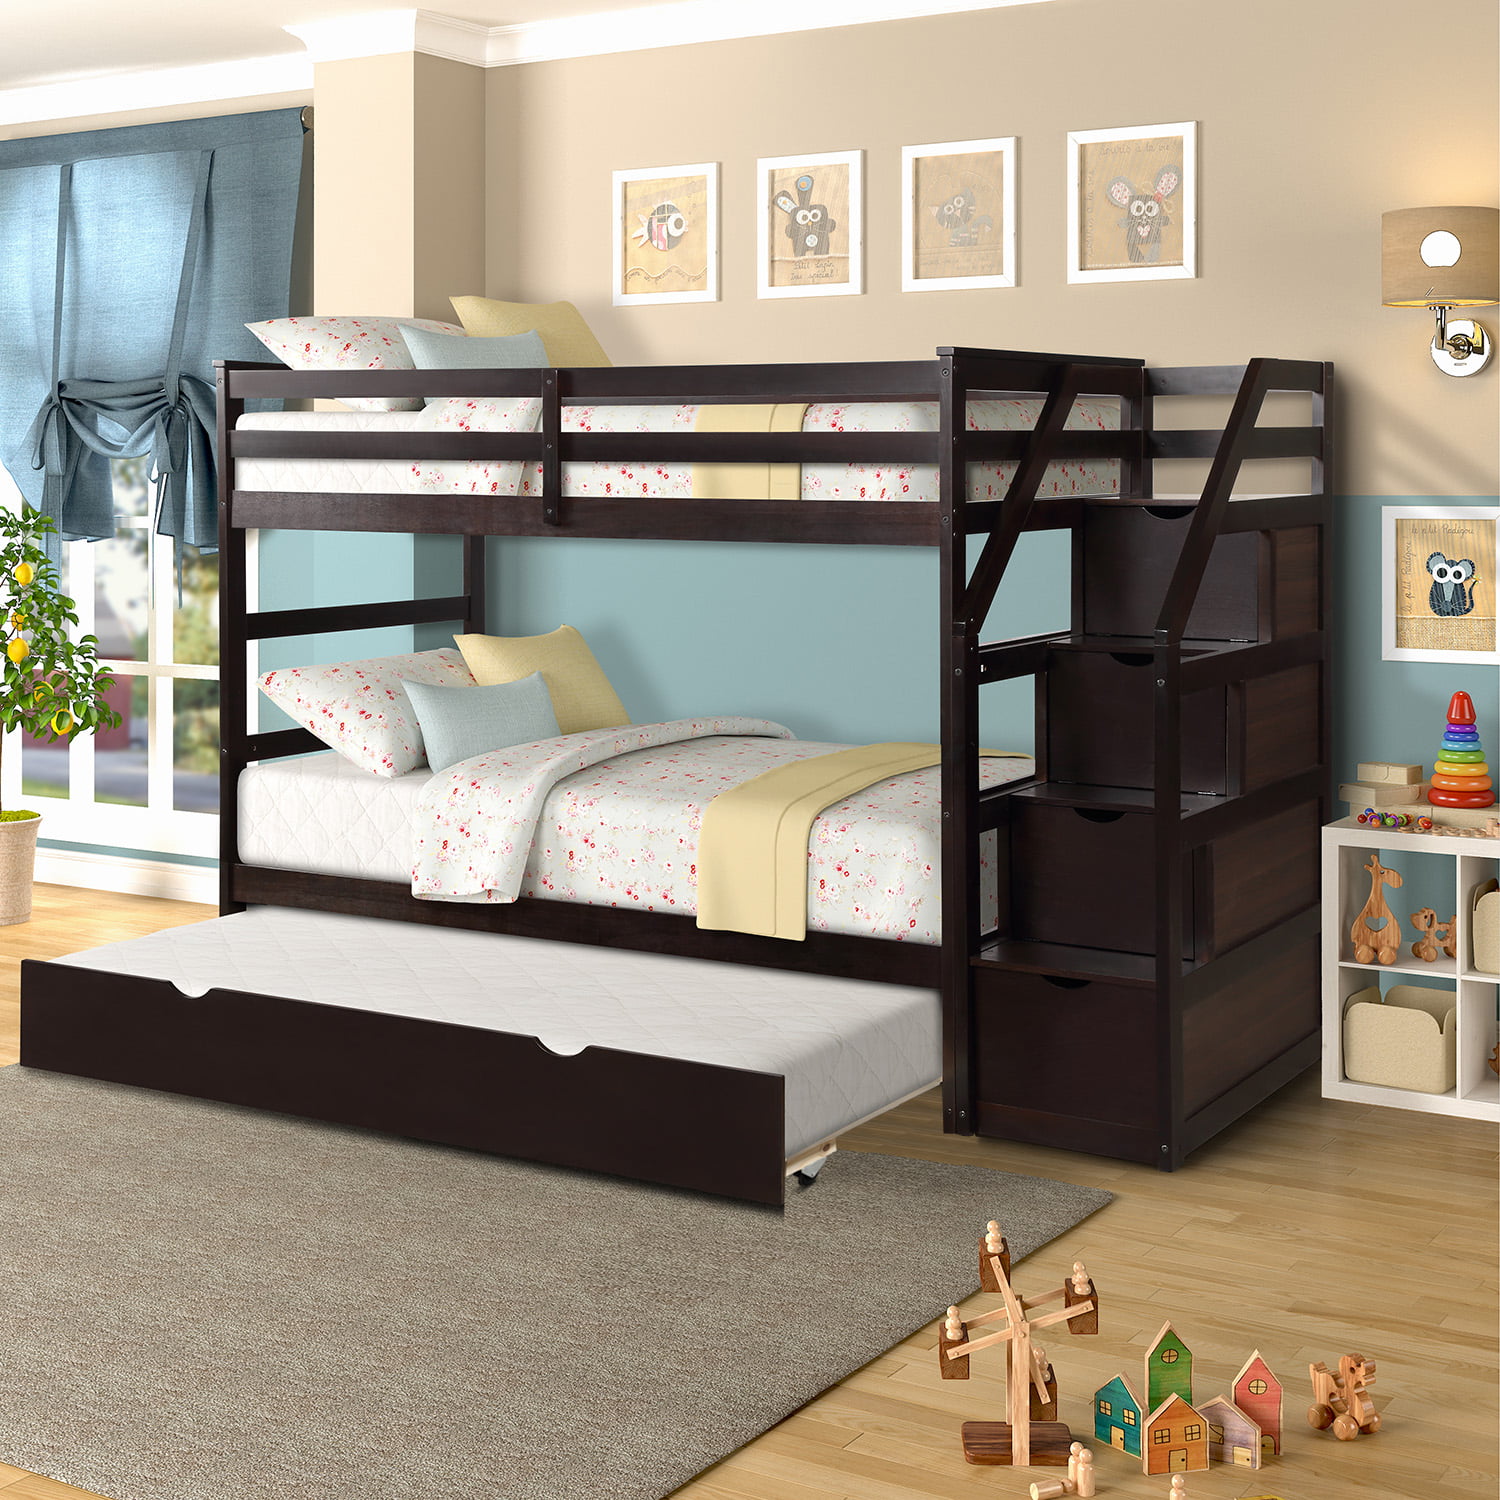 Twin Over Bunk Beds For 3 12 Kids, Bunk Bed For 3 Year Old